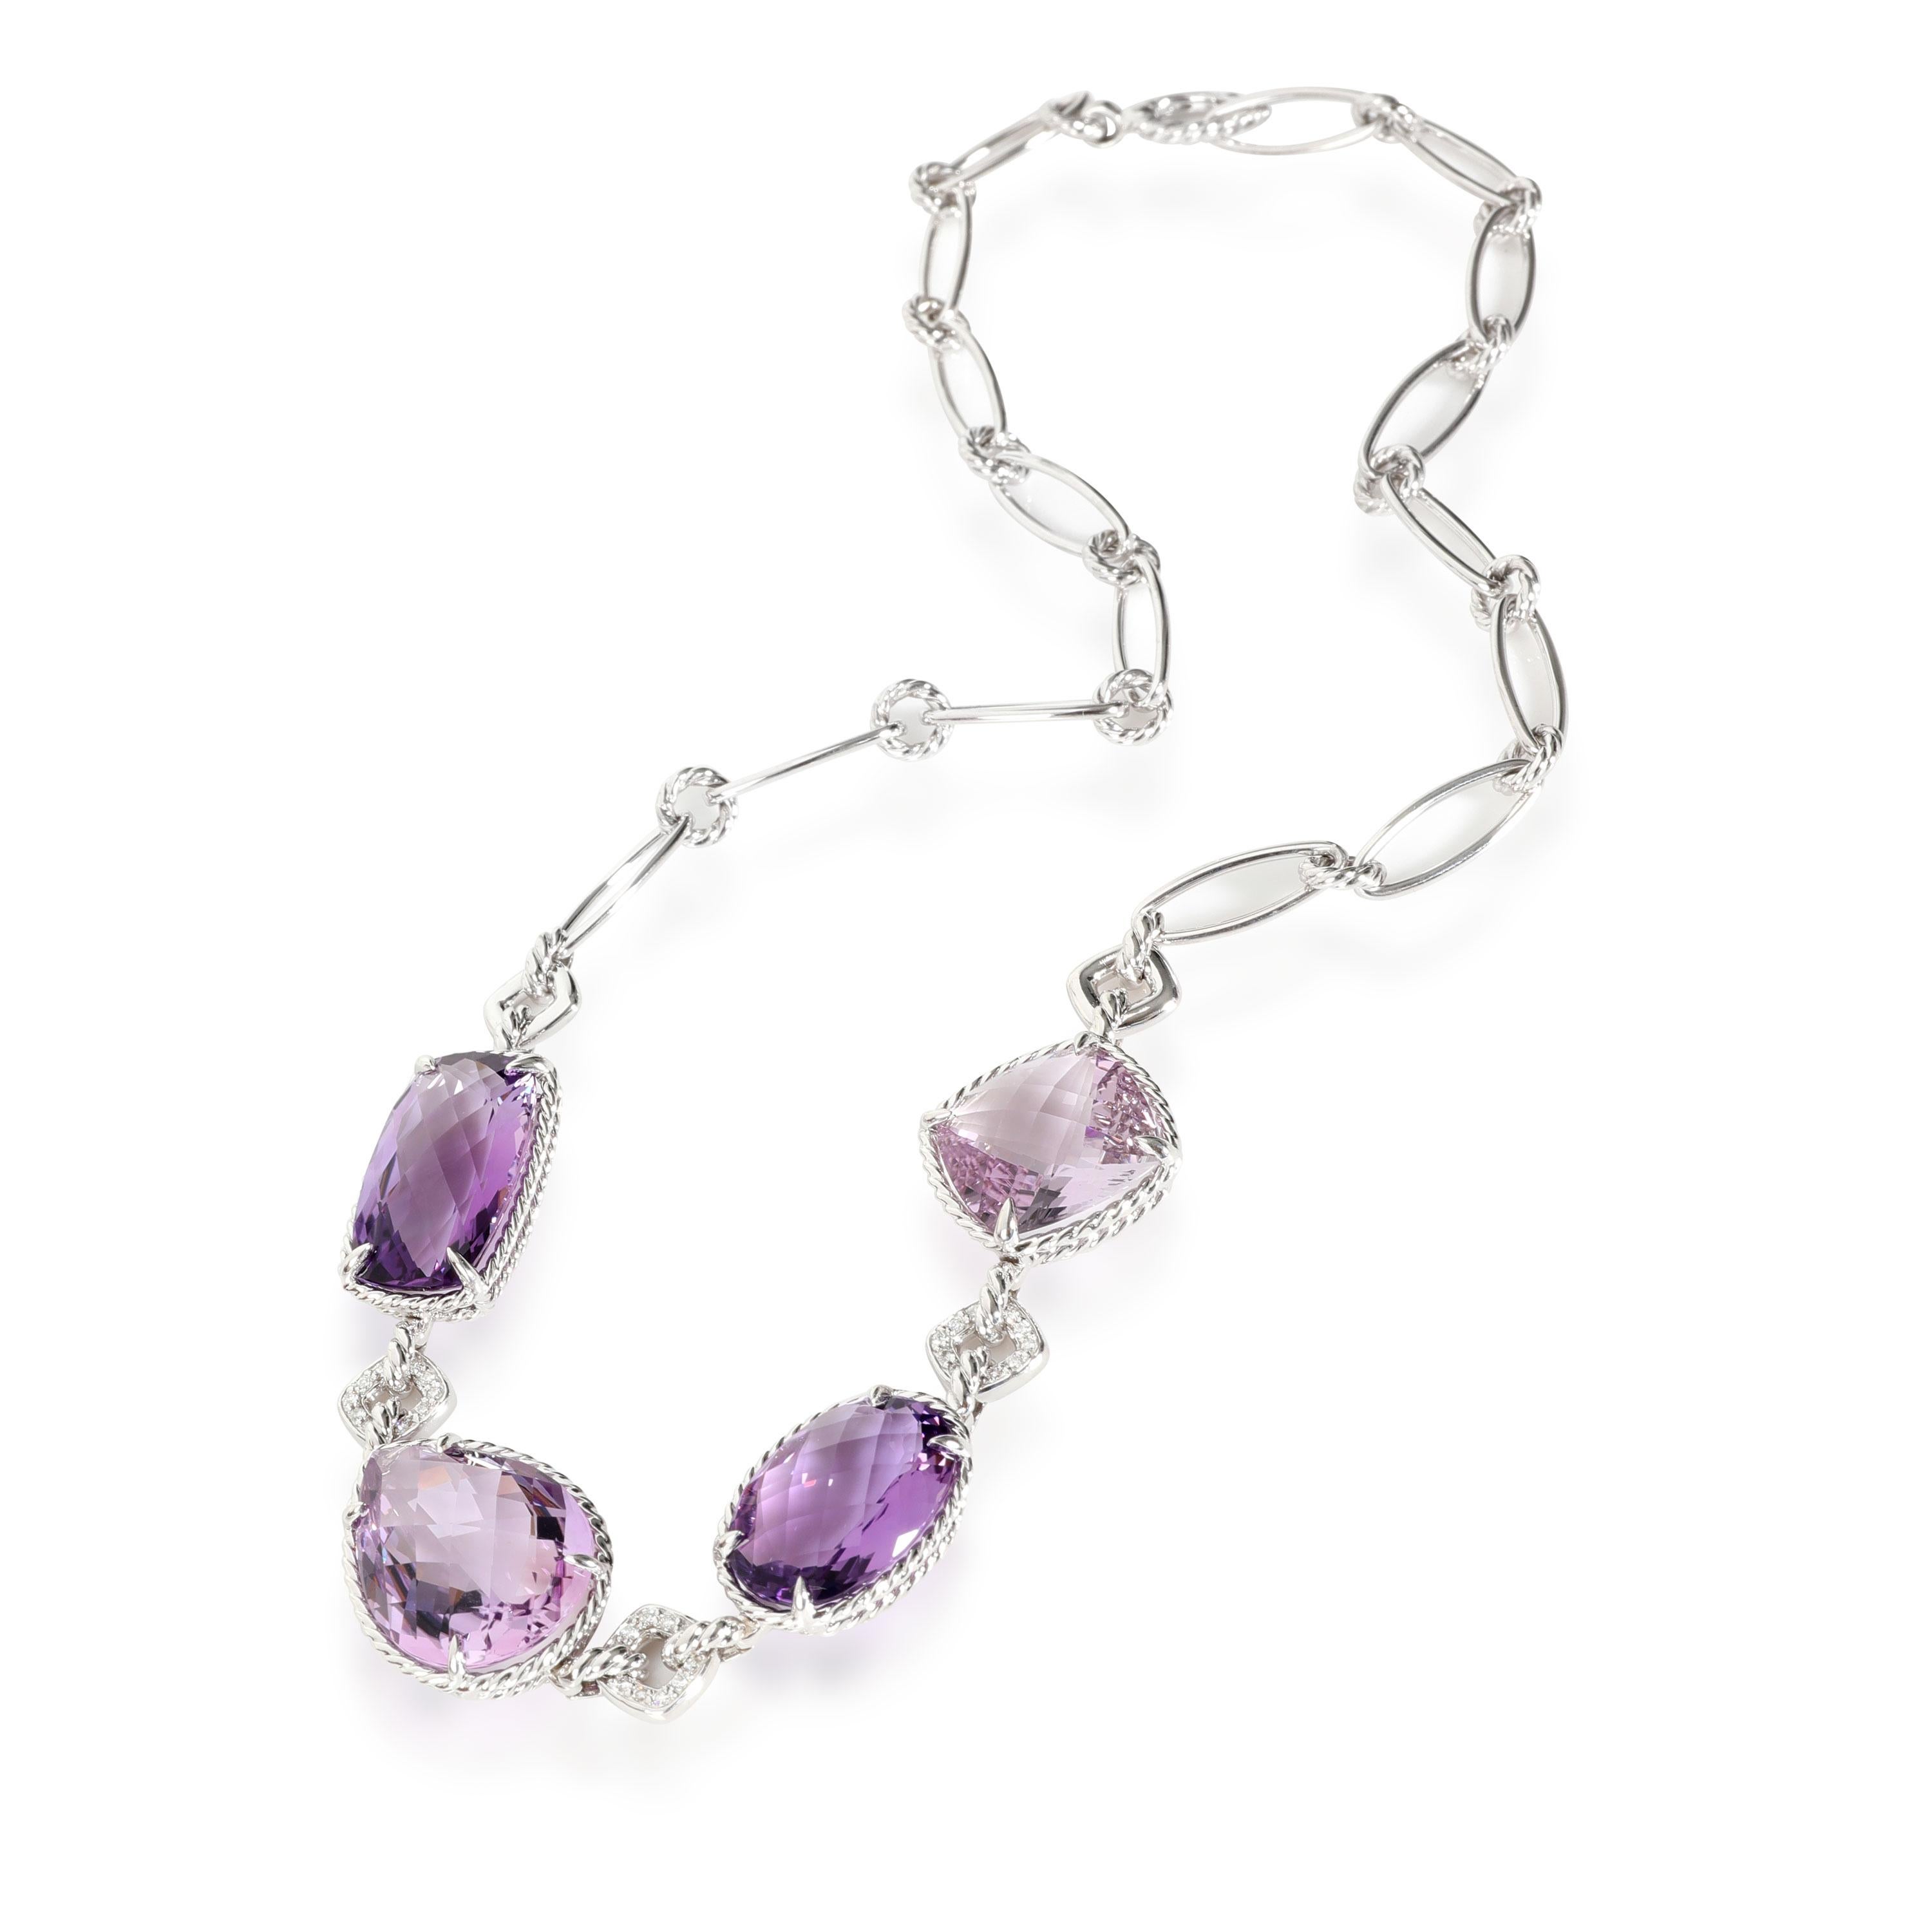 David Yurman Amethyst Diamond Necklace in 18kt White Gold 0.3 CTW

PRIMARY DETAILS
SKU: 113491
Listing Title: David Yurman Amethyst Diamond Necklace in 18kt White Gold 0.3 CTW
Condition Description: Retails for 9000 USD. In excellent condition and